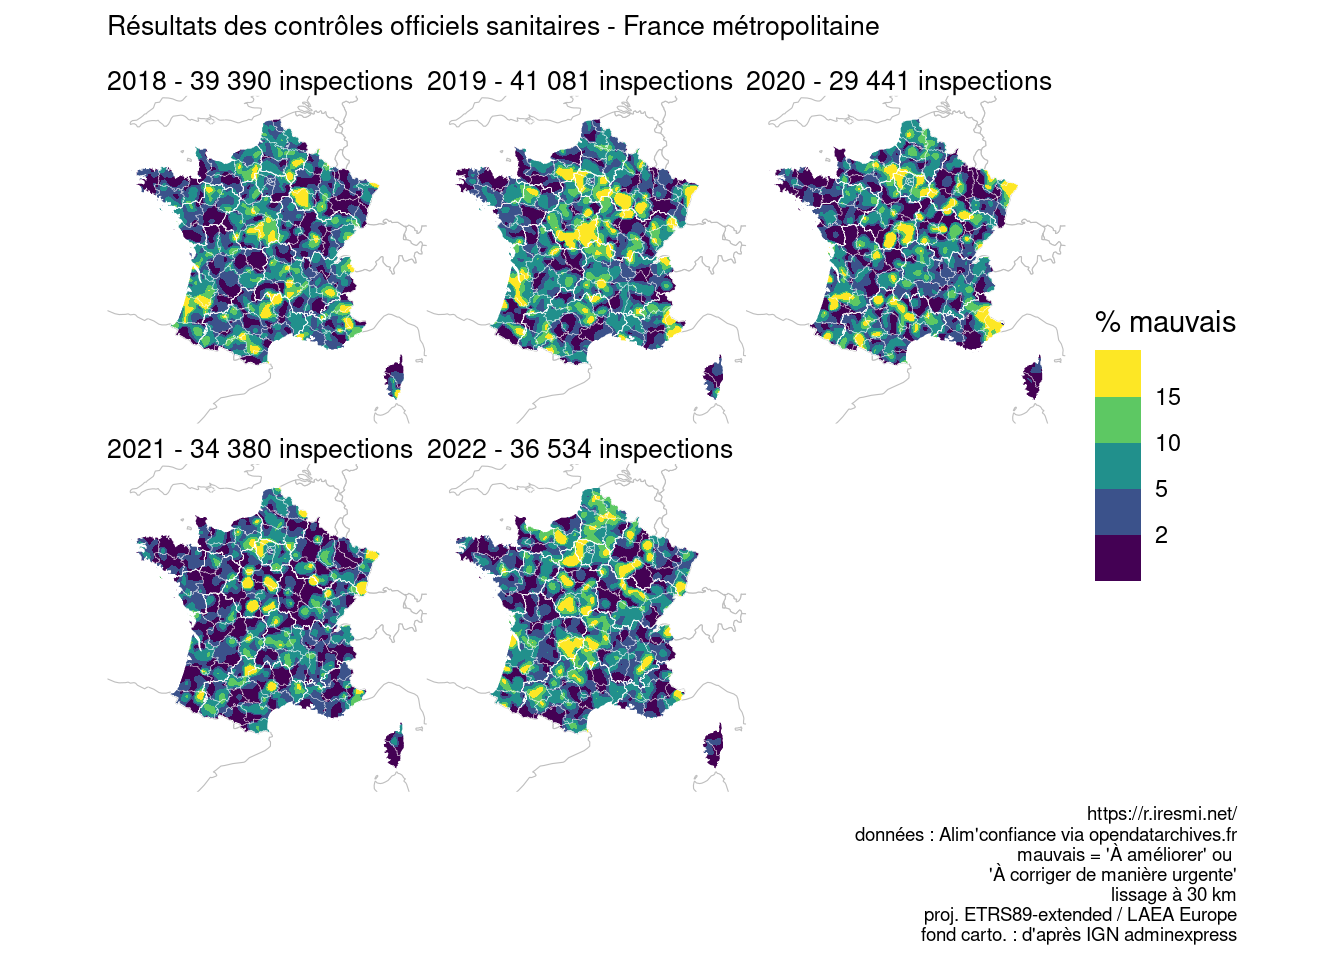 A small multiple map of bad controls in France (with kernel smoothing) by year